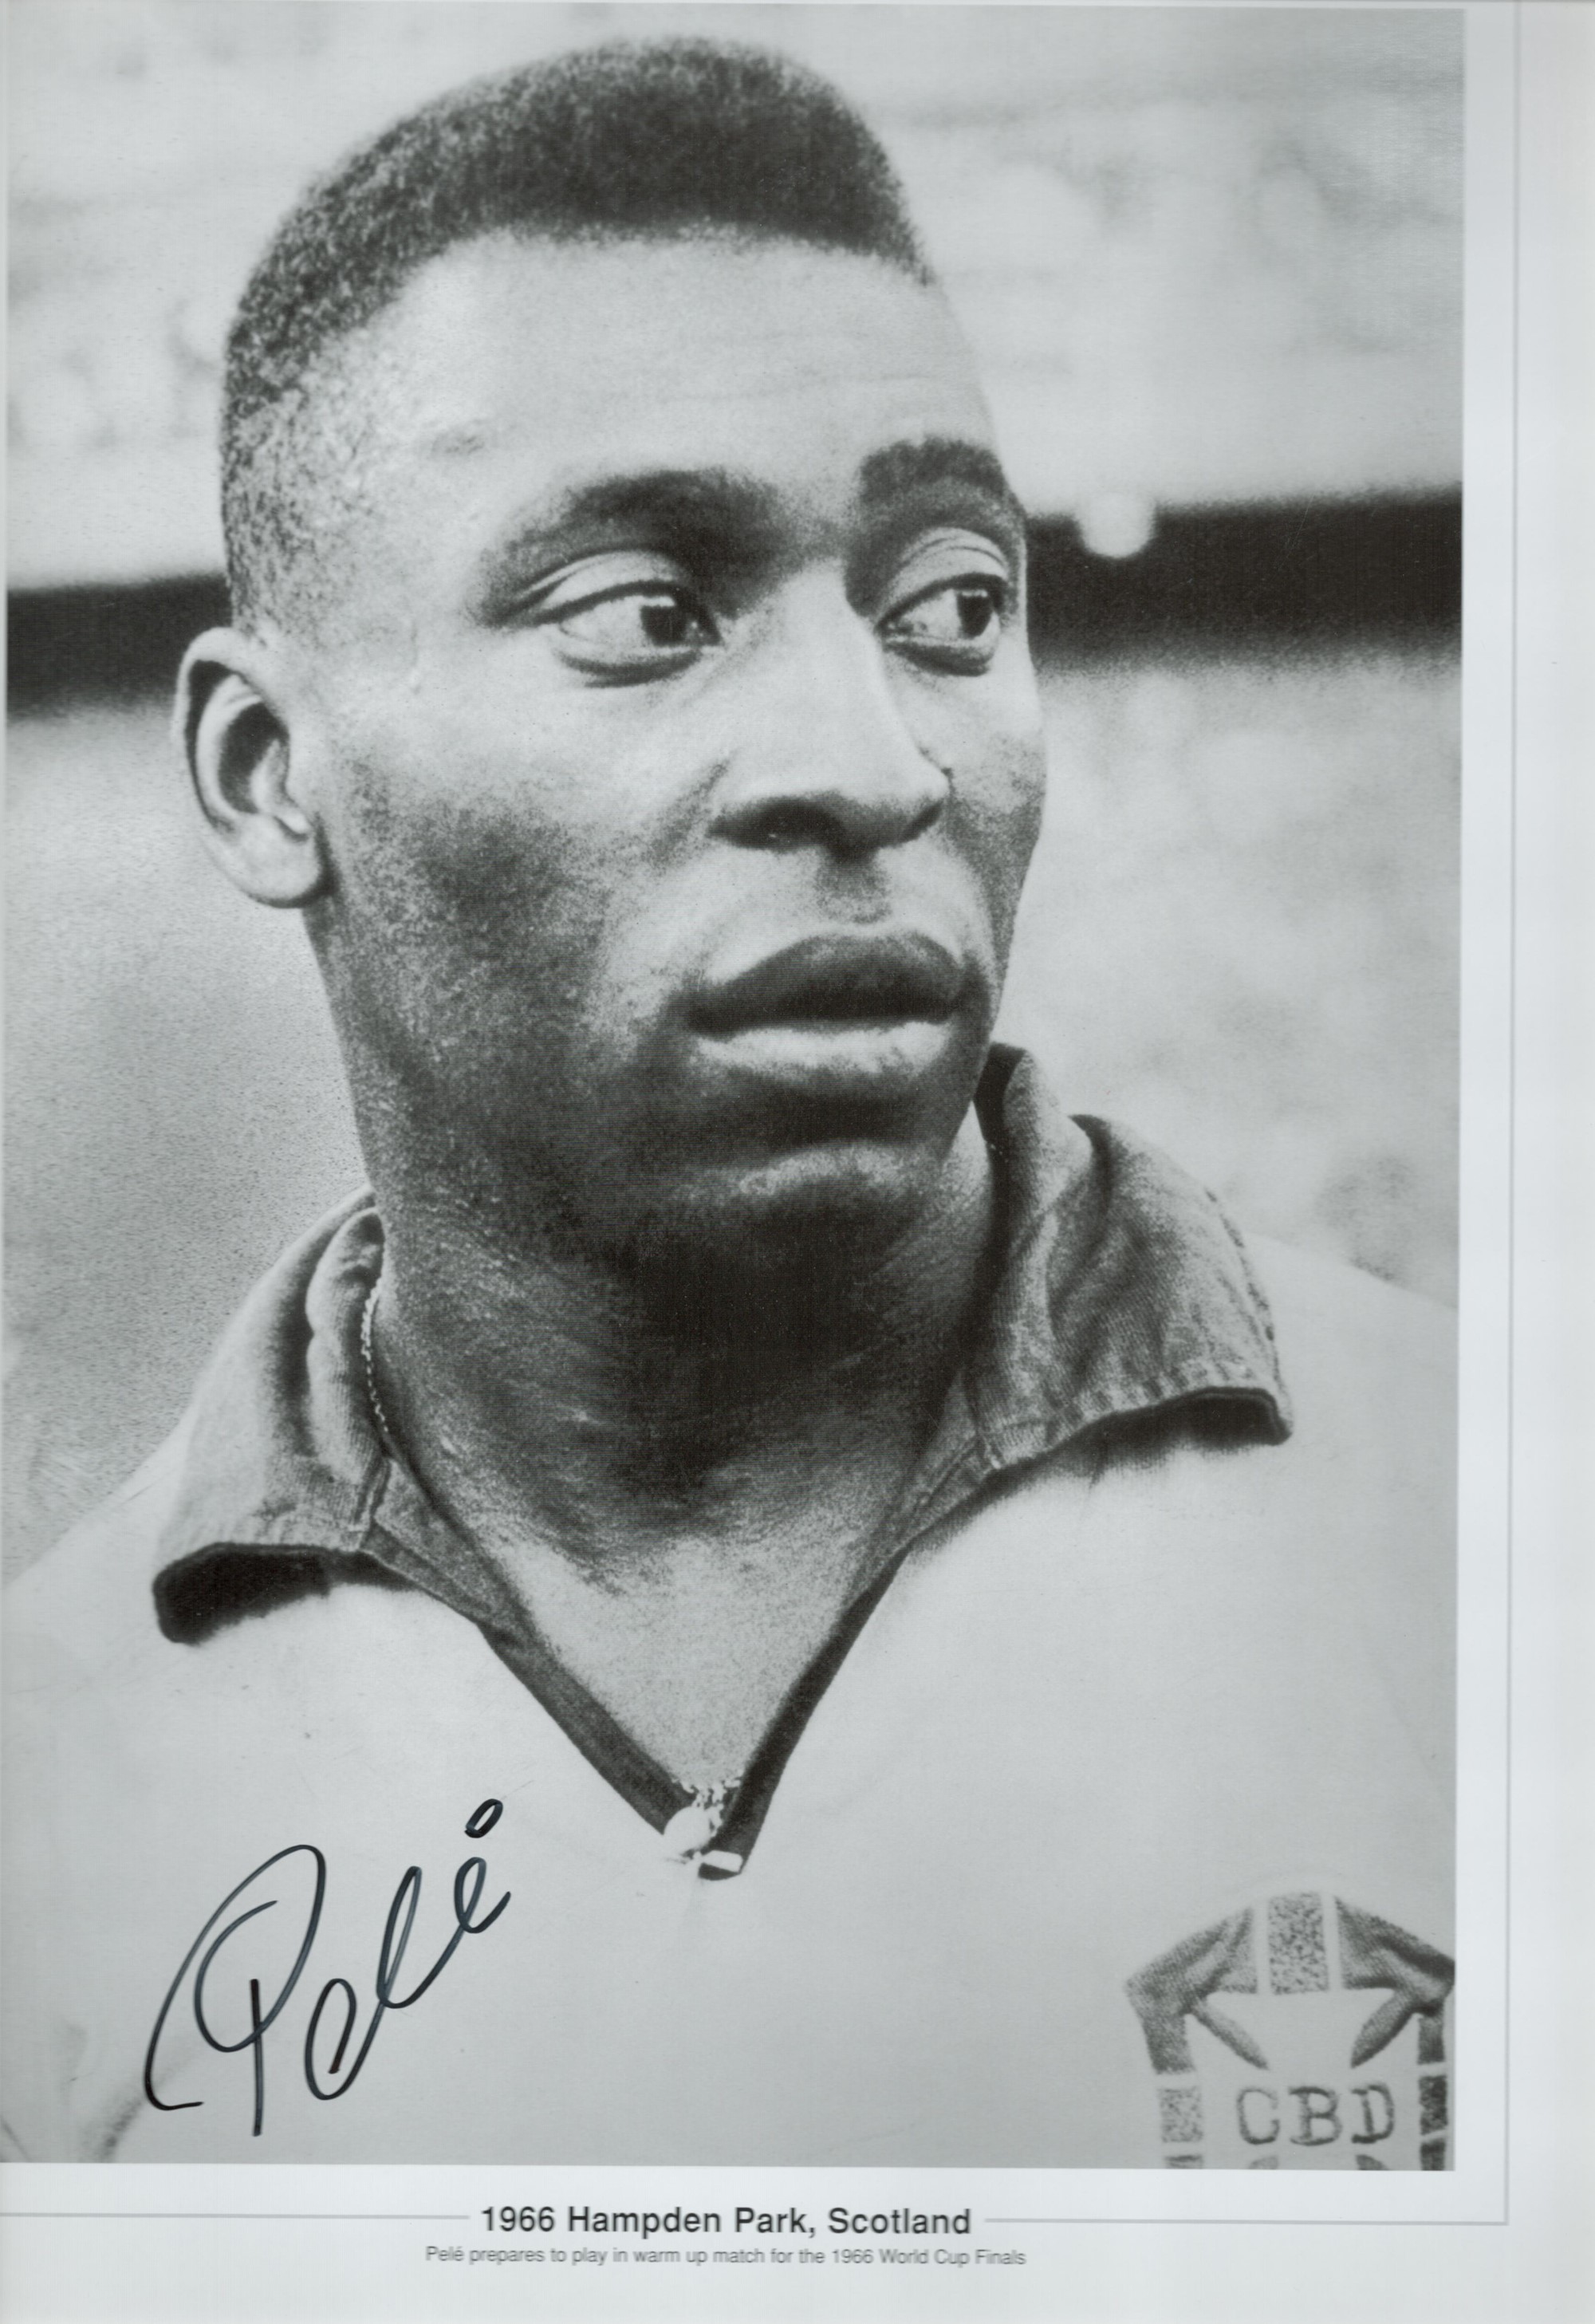 Football Pele signed 20x14 black and white print pictured before warm up match for the 1966 World